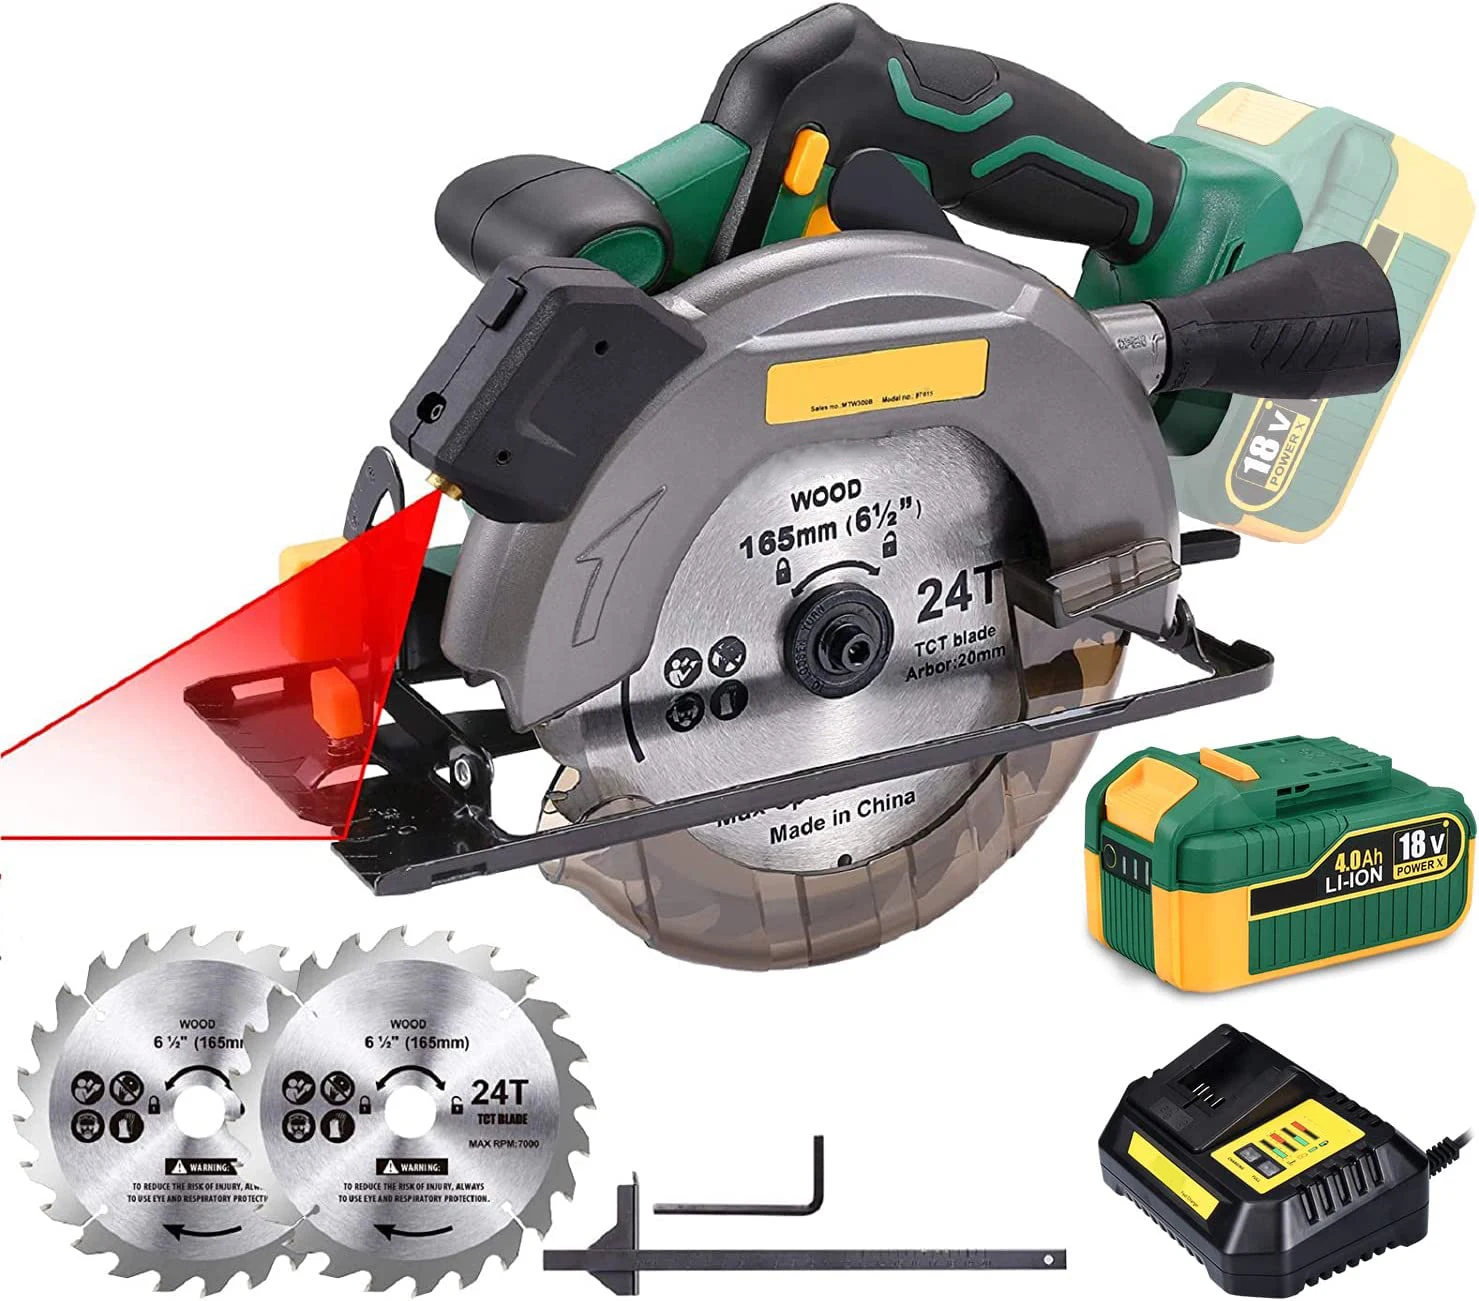 

4300rpm Cordless Electric Circular Saw 18V 4Ah Battery Adjustable Base Plate Laser Guide Cutter Woodworking Saw Cutting Machine